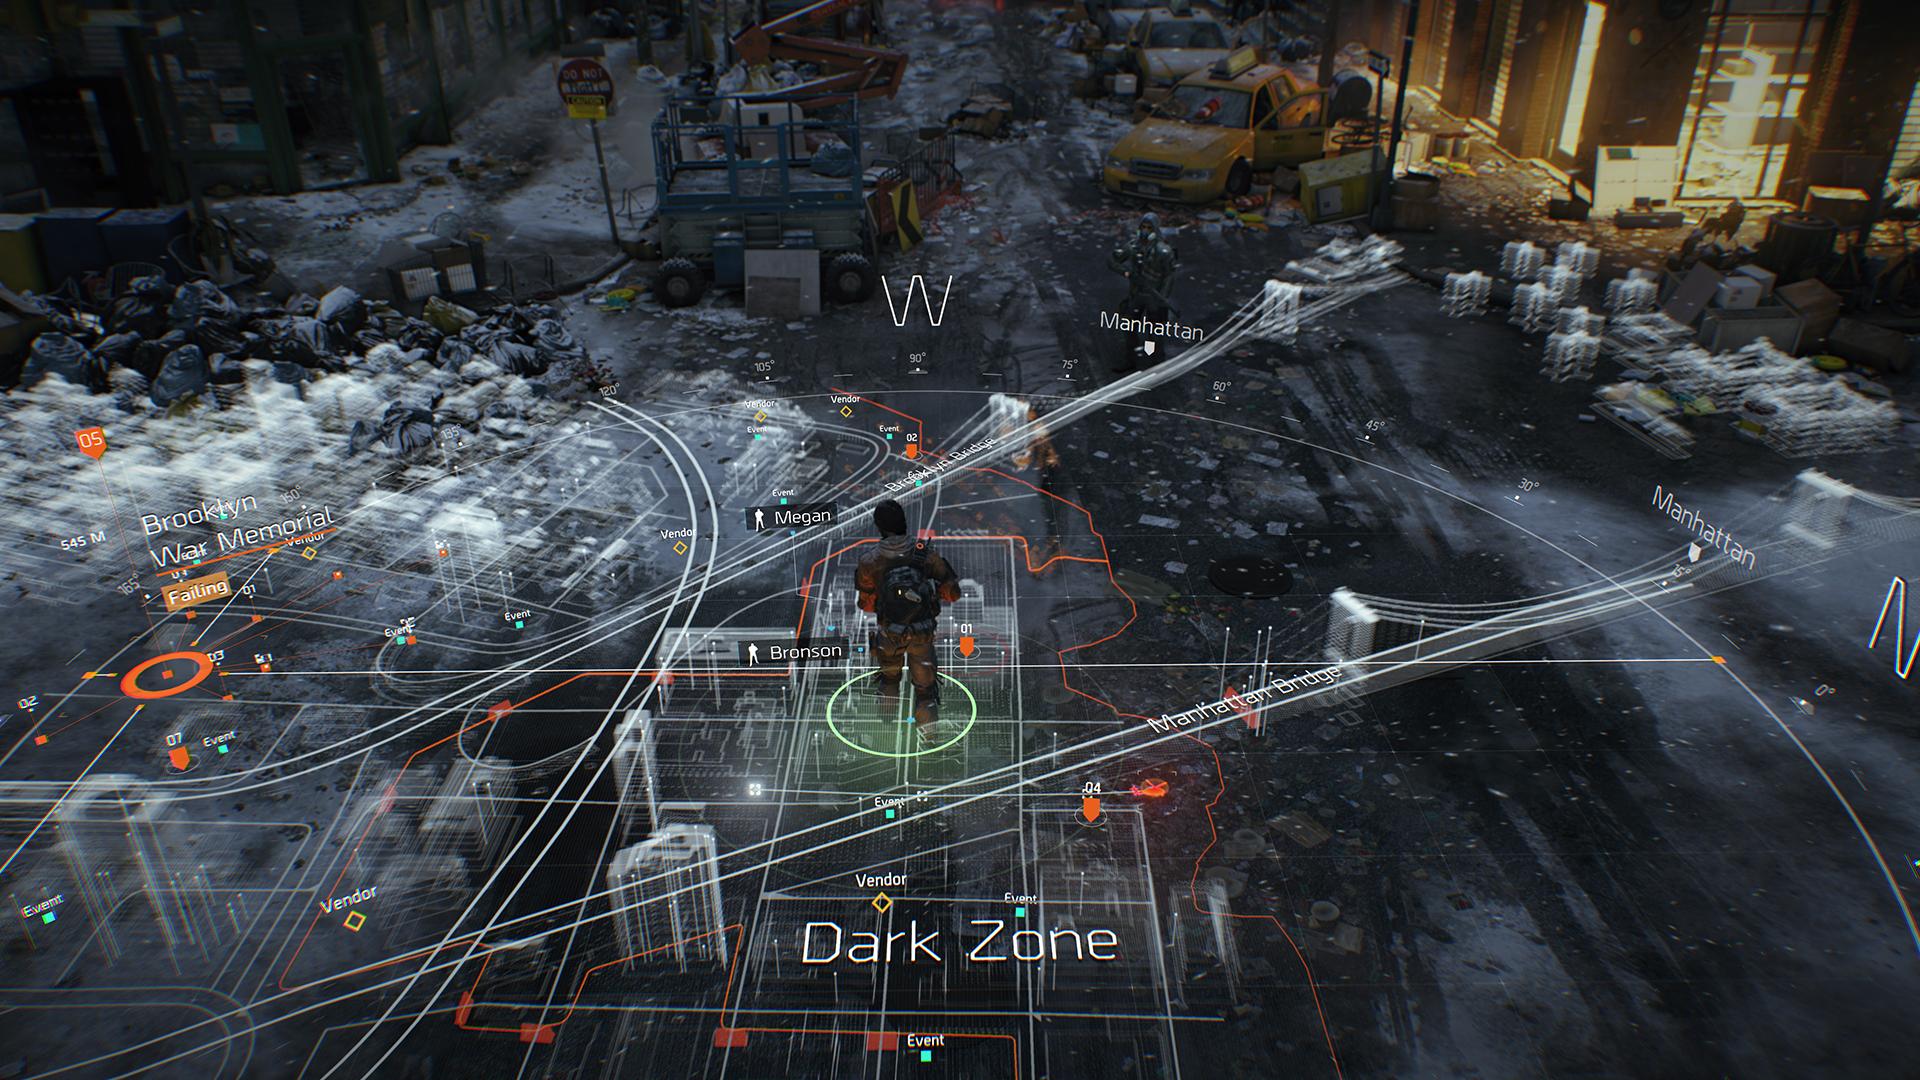 Video games are a rich source of UX experiments possible when rendering in 3d space without limitations. Here is an example of a full-environment, task-focused navigation app (The Division)